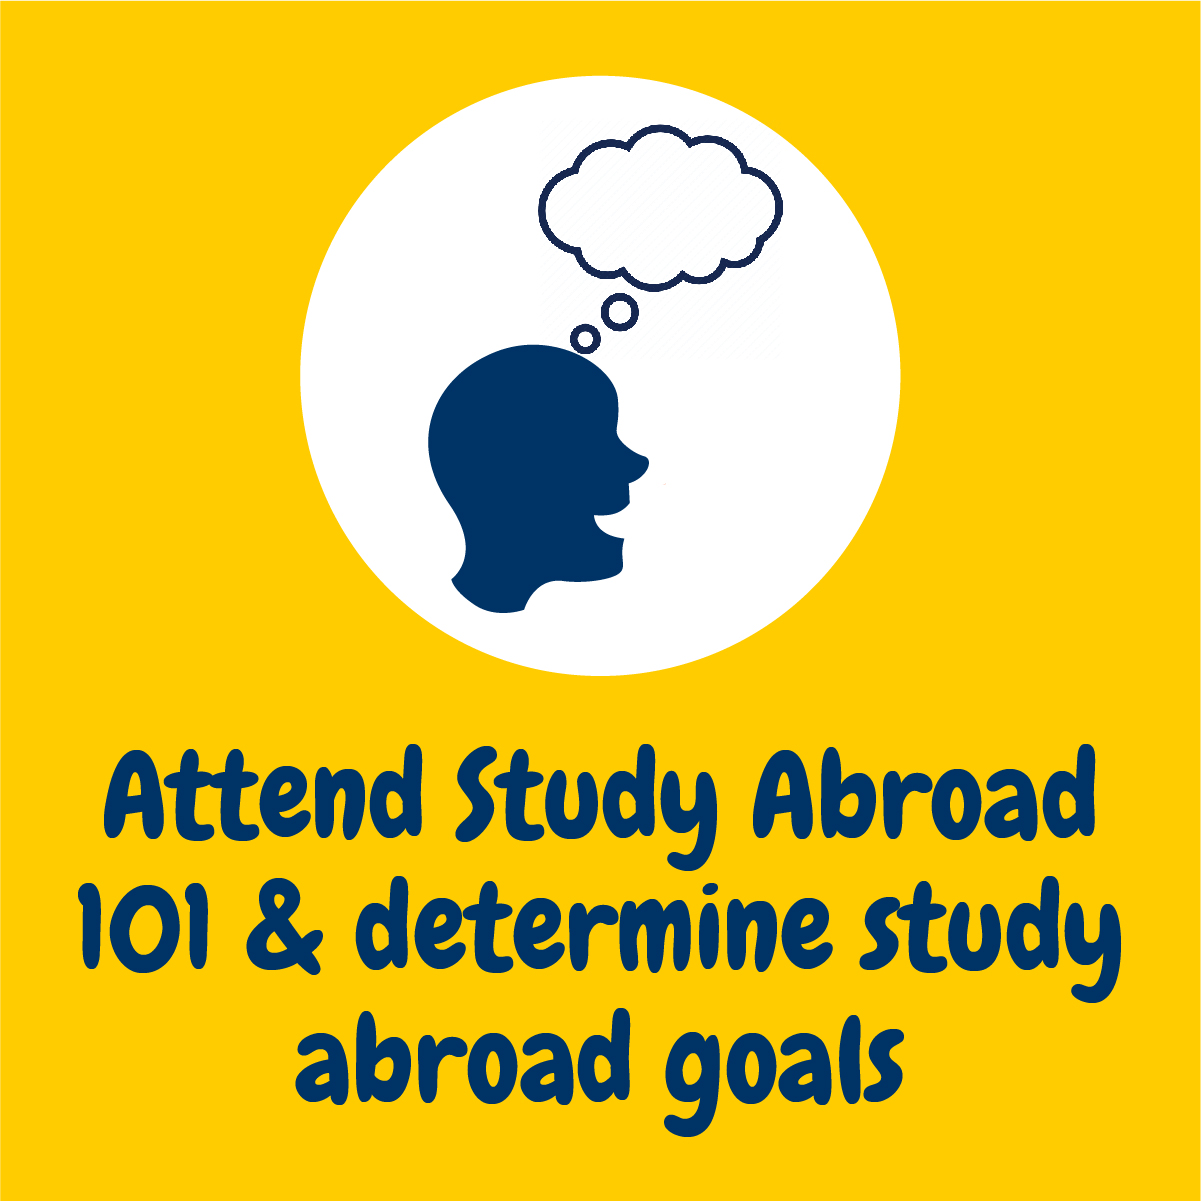 Attend Study Abroad 101 & determine study abroad goals